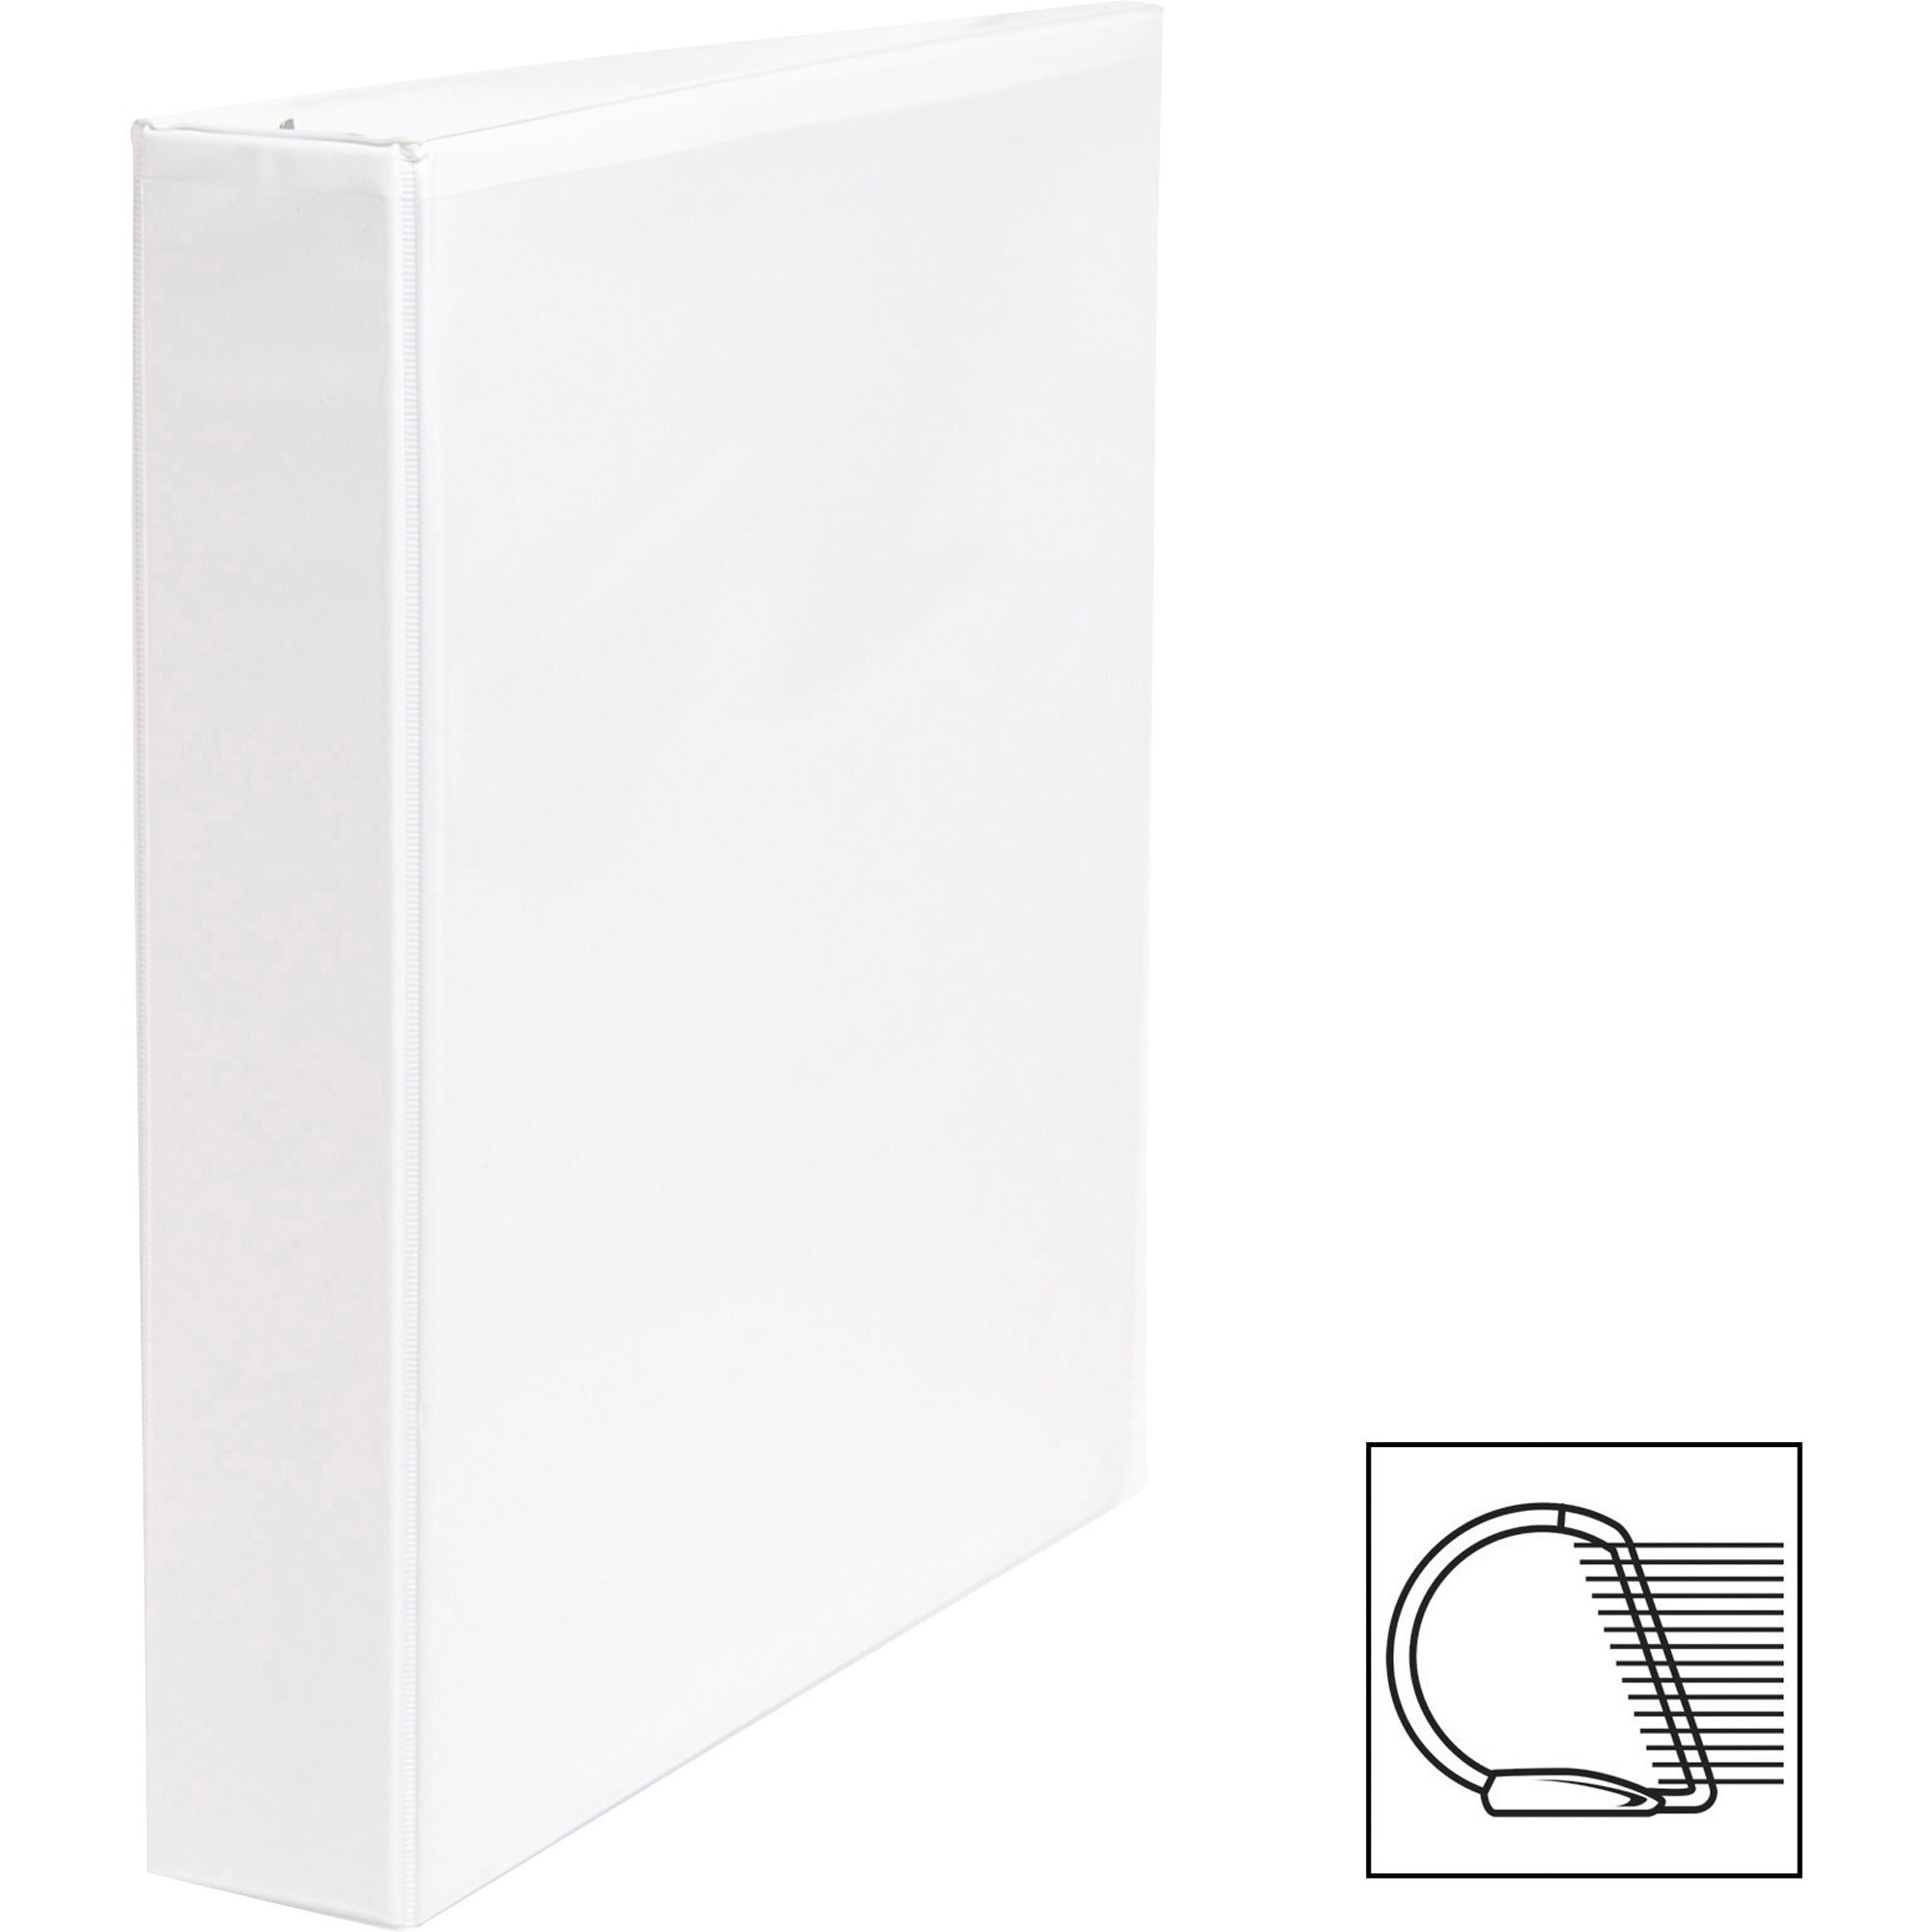 business-source-basic-d-ring-view-binders_bsn28441bd - 2